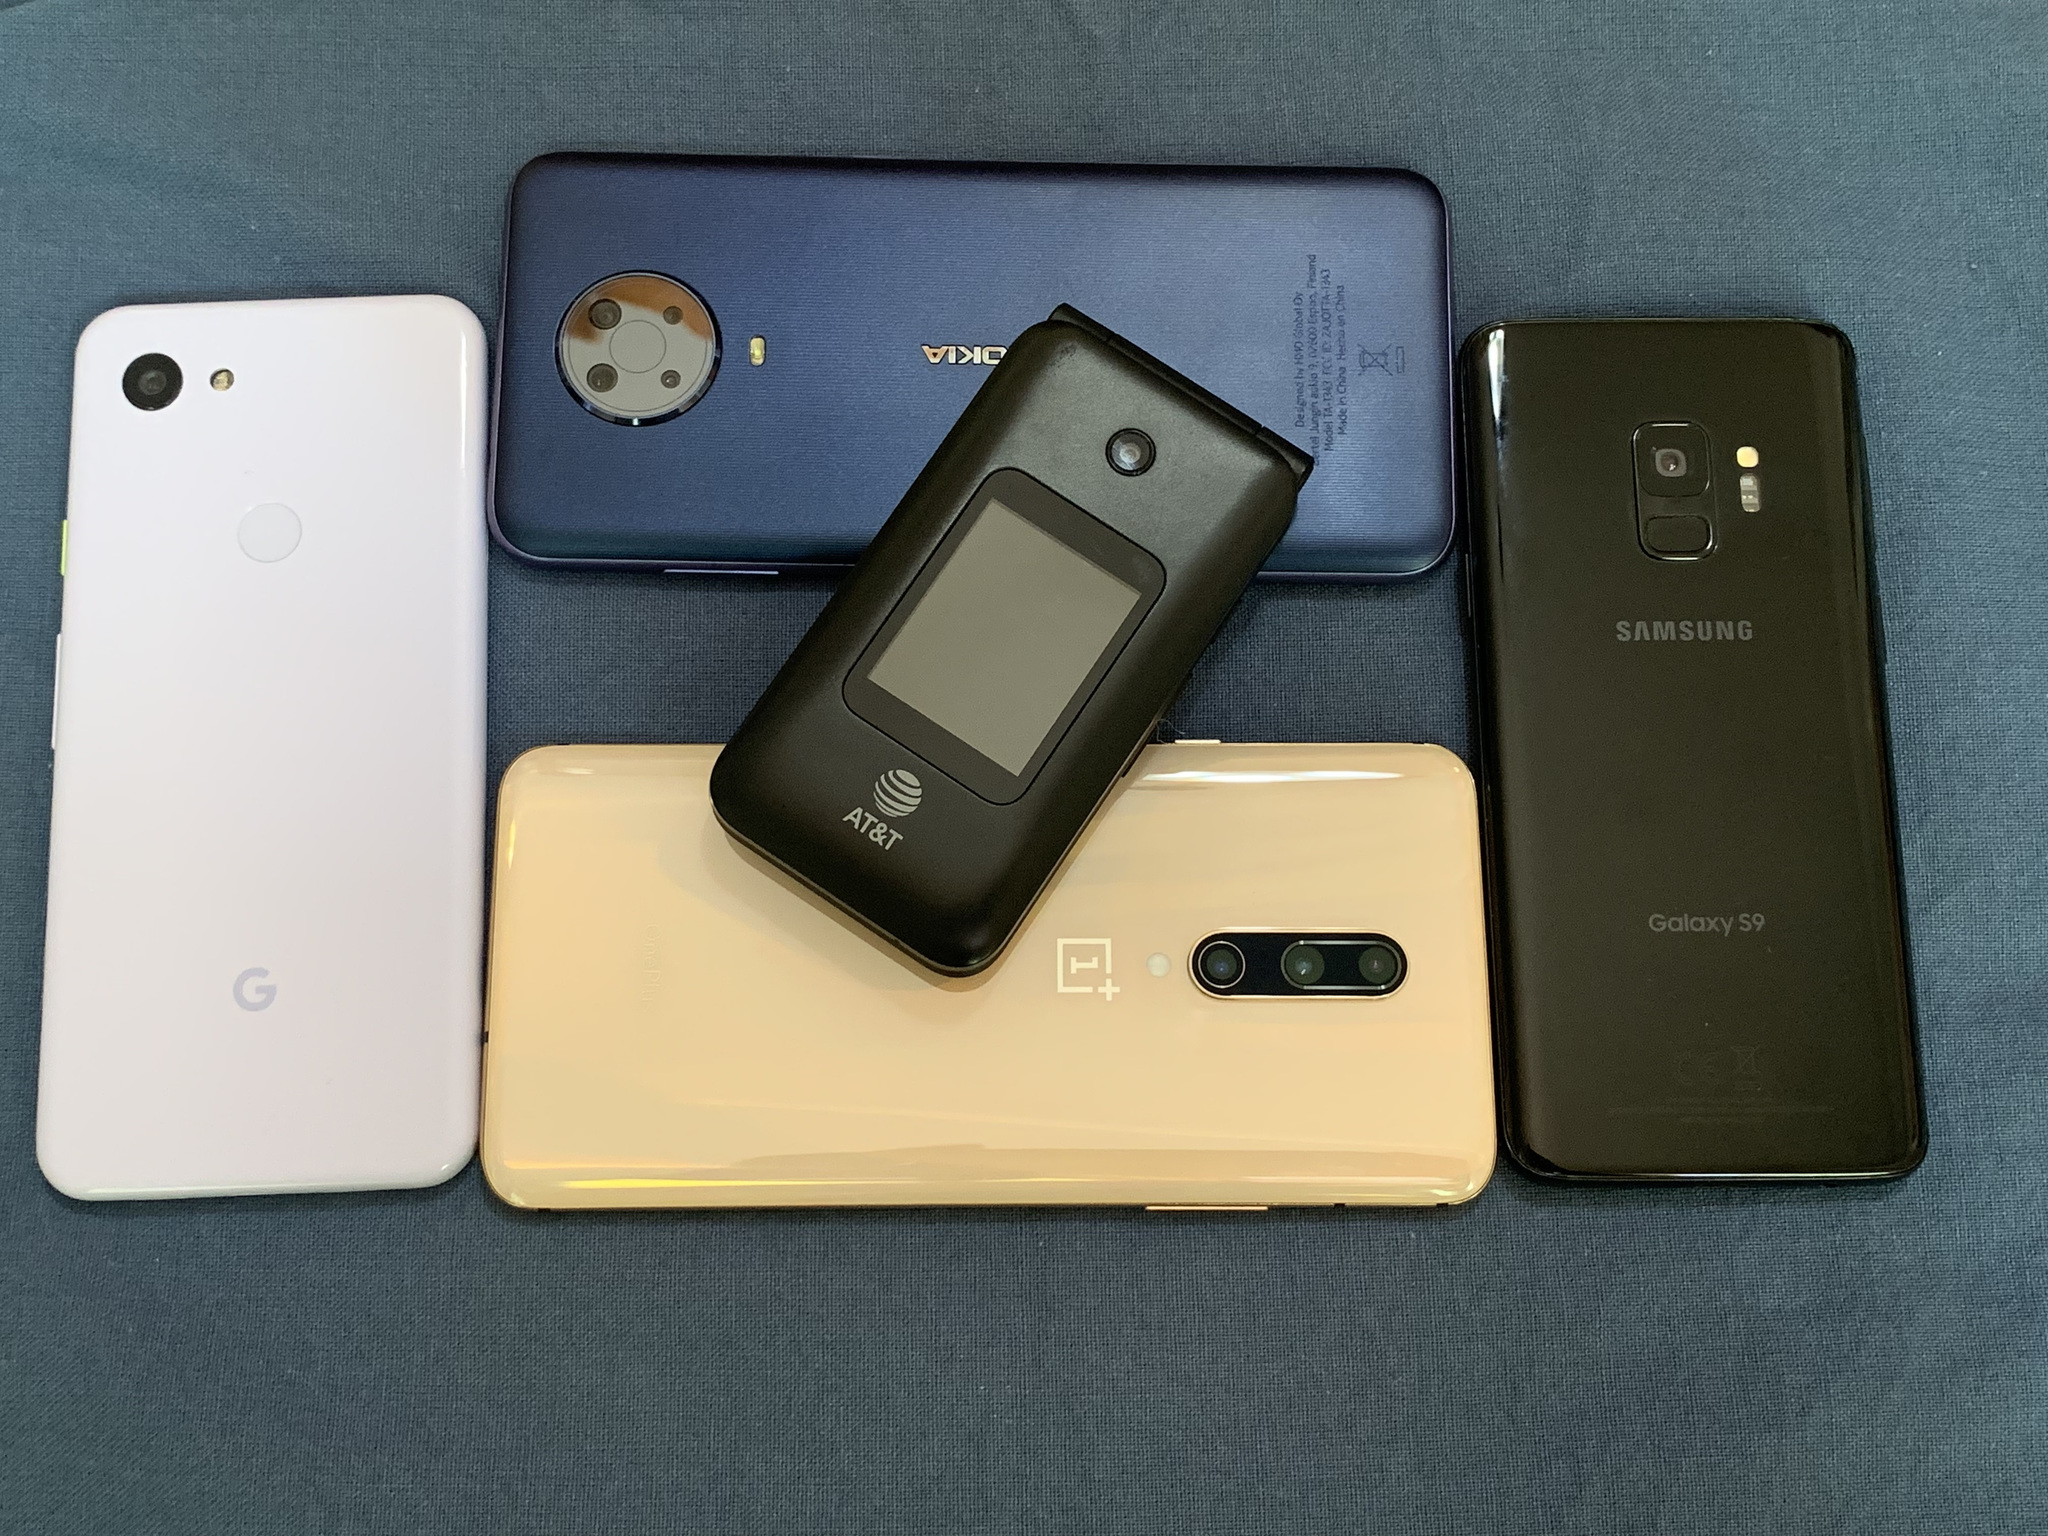 A flip-phone sitting on top of several smartphones